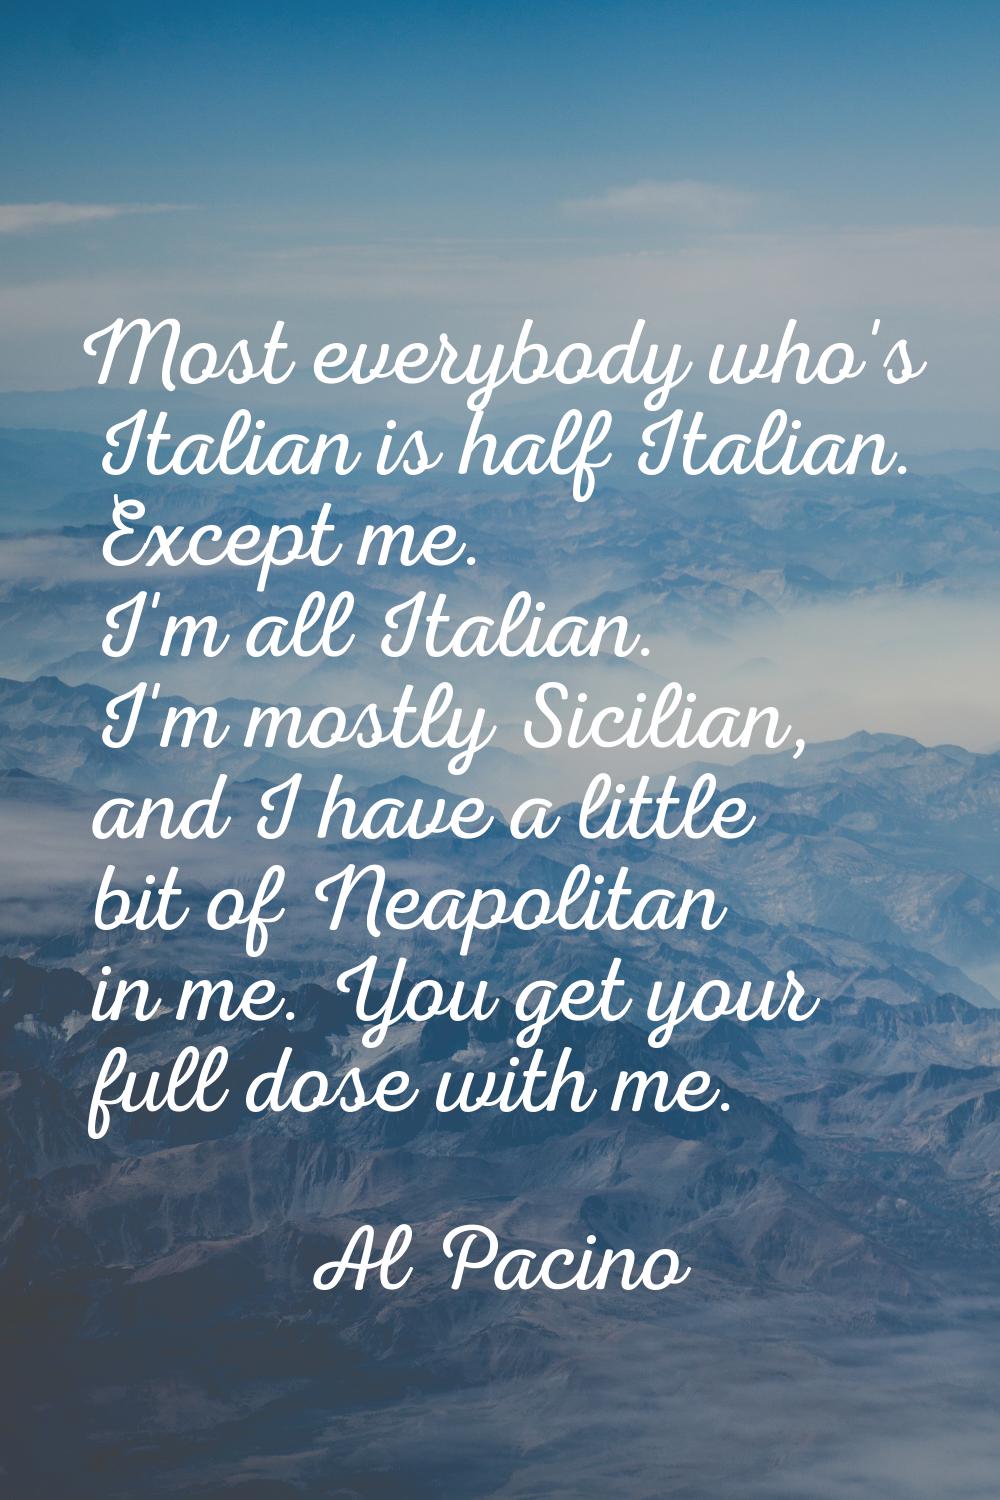 Most everybody who's Italian is half Italian. Except me. I'm all Italian. I'm mostly Sicilian, and 